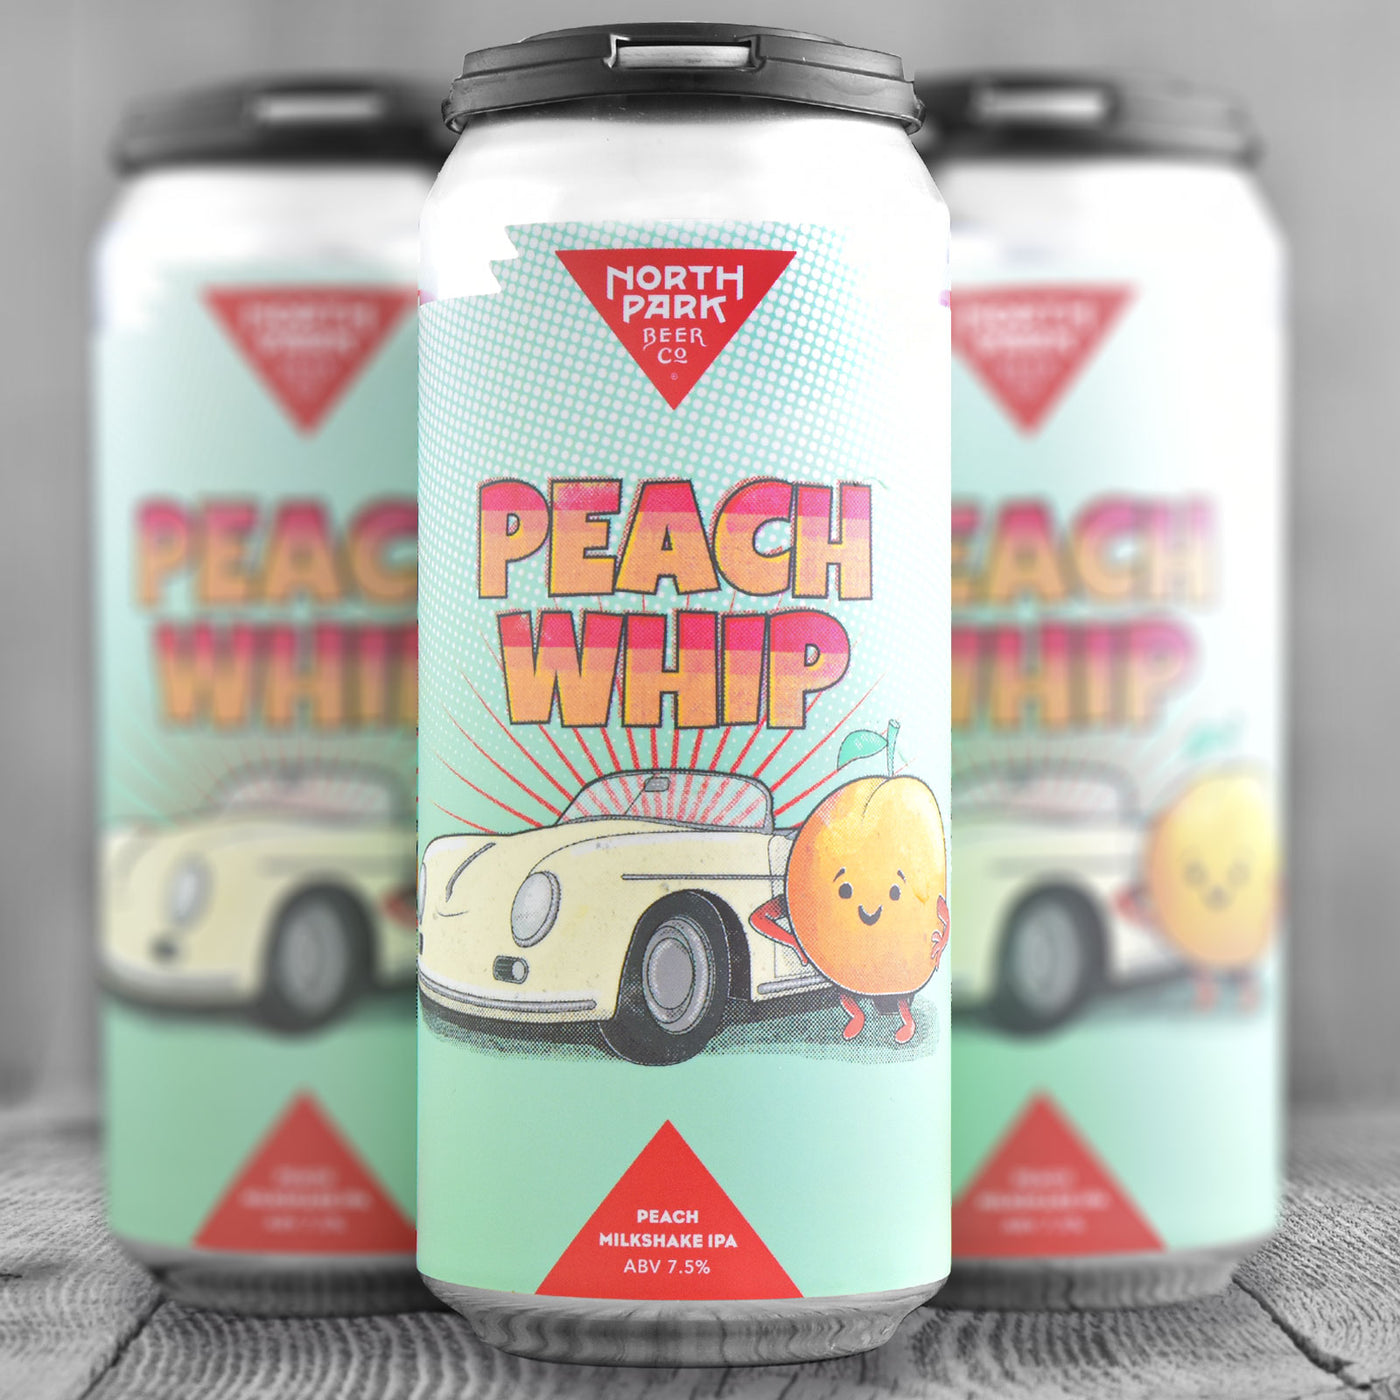 North Park Beer Co. Peach Whip